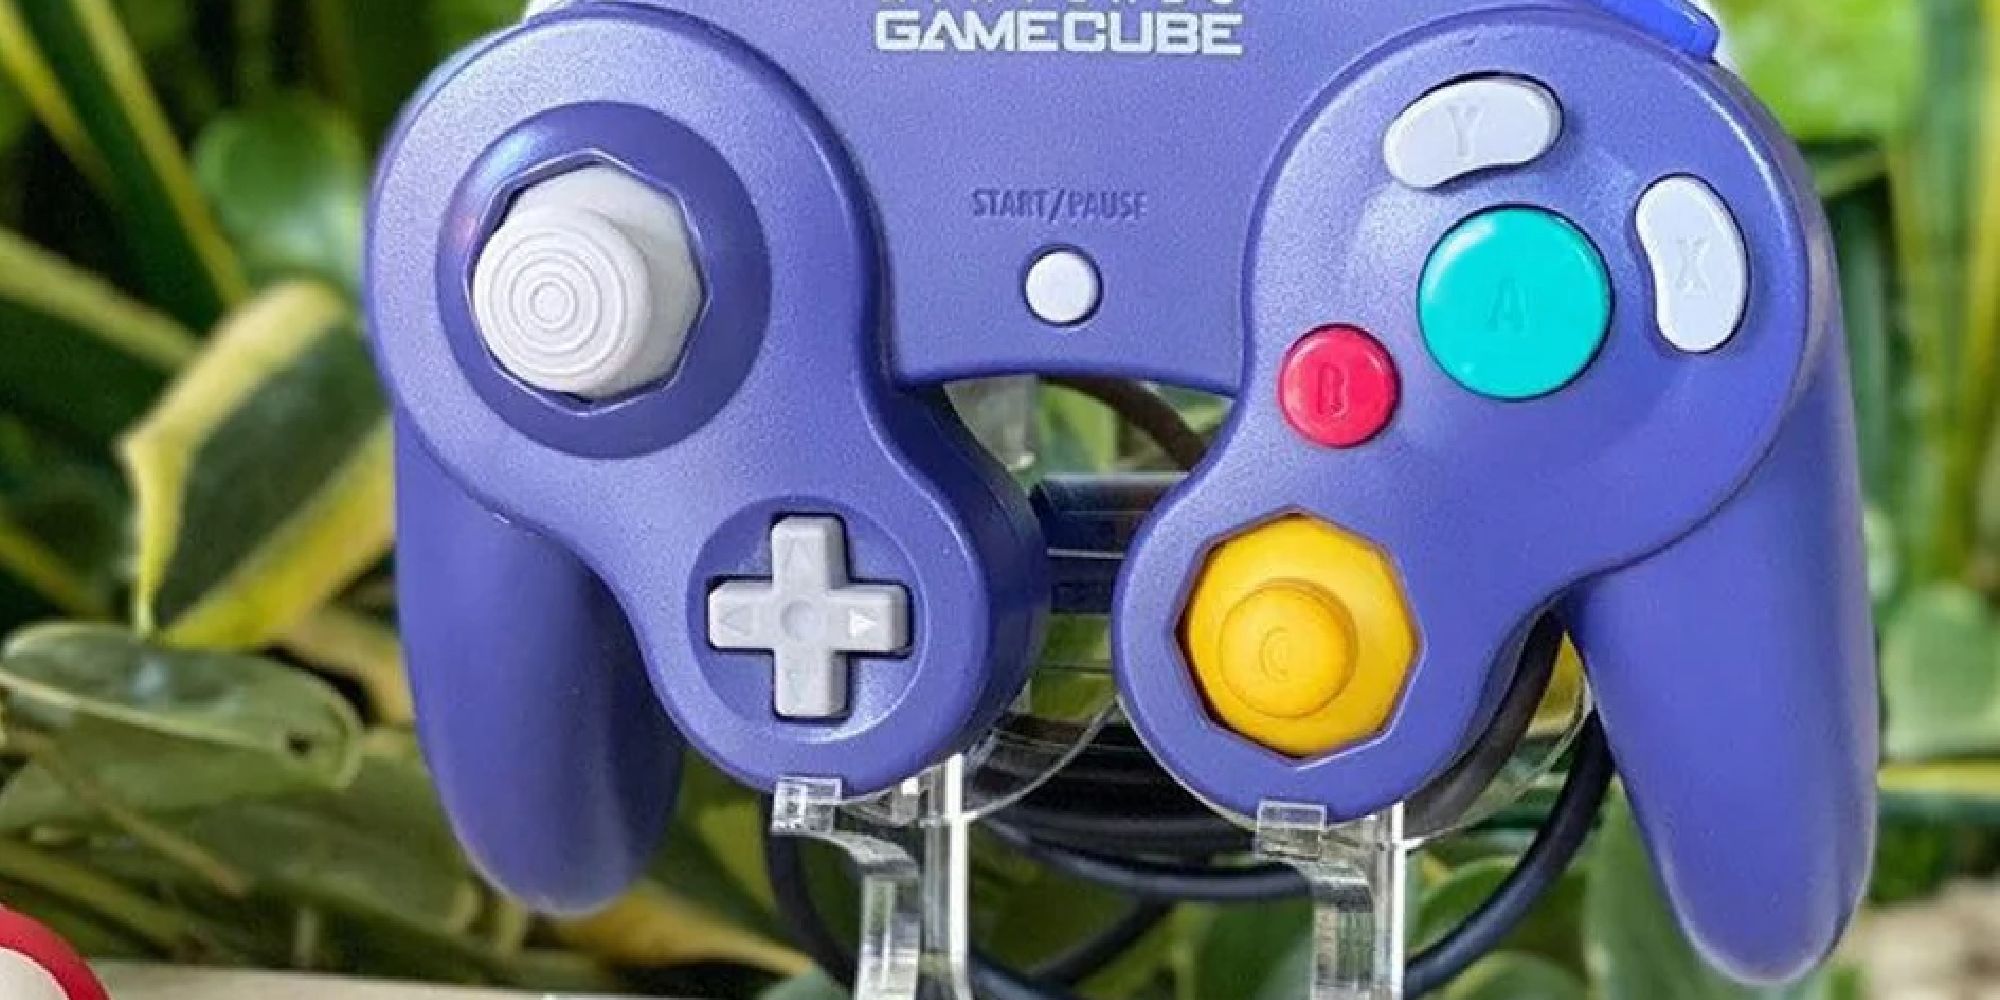 A GameCube controller resting on a plastic stand